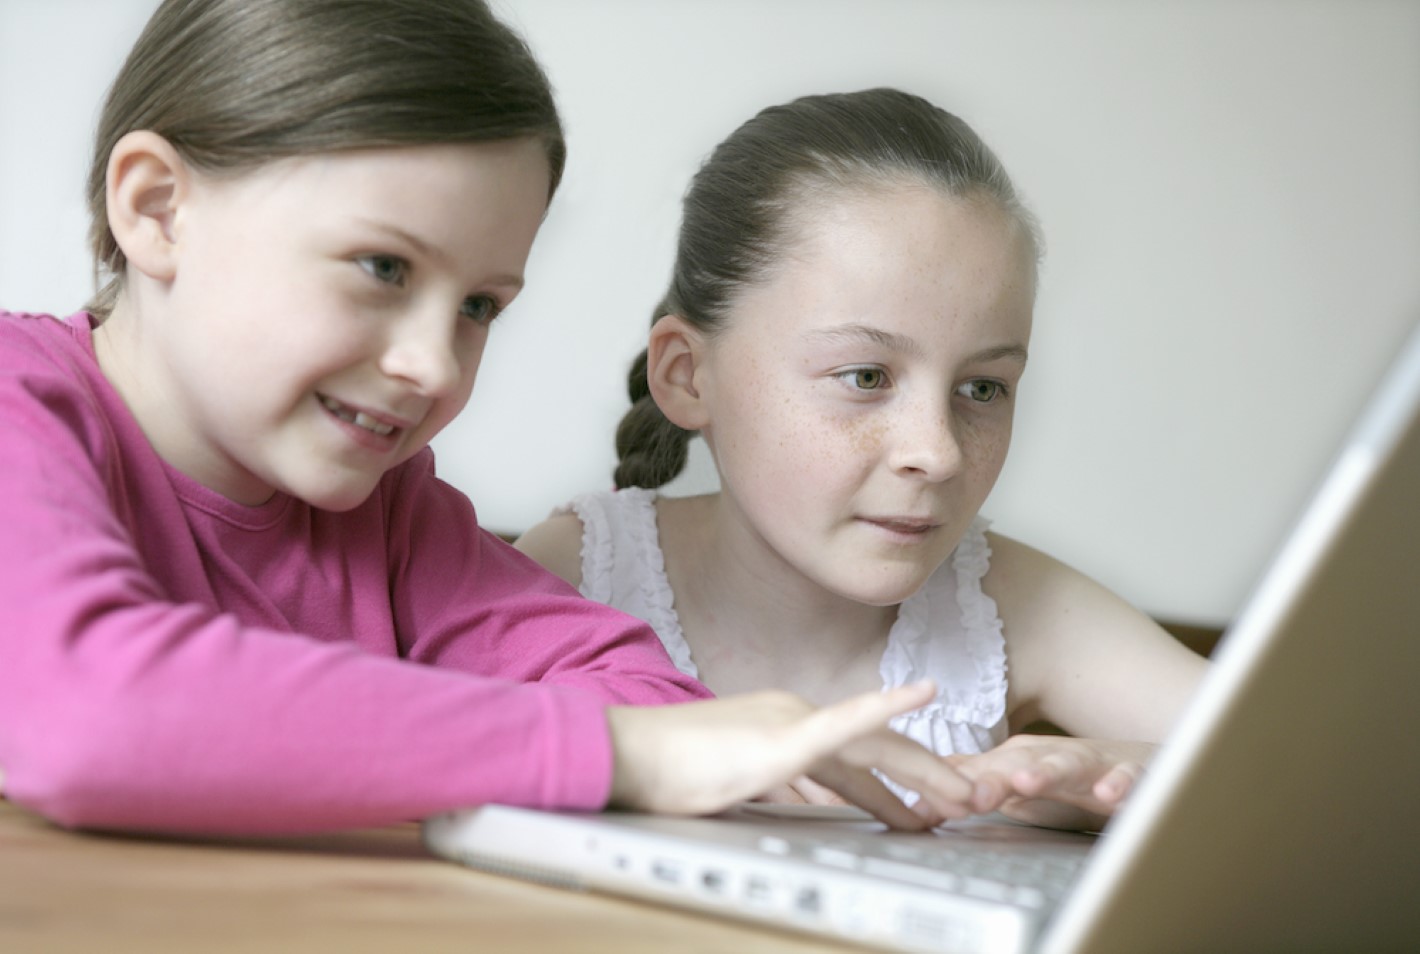 Two girls looking at a laptop and smiling. One is wearing a pink to shirt, and the other is wearing a white t shirt.